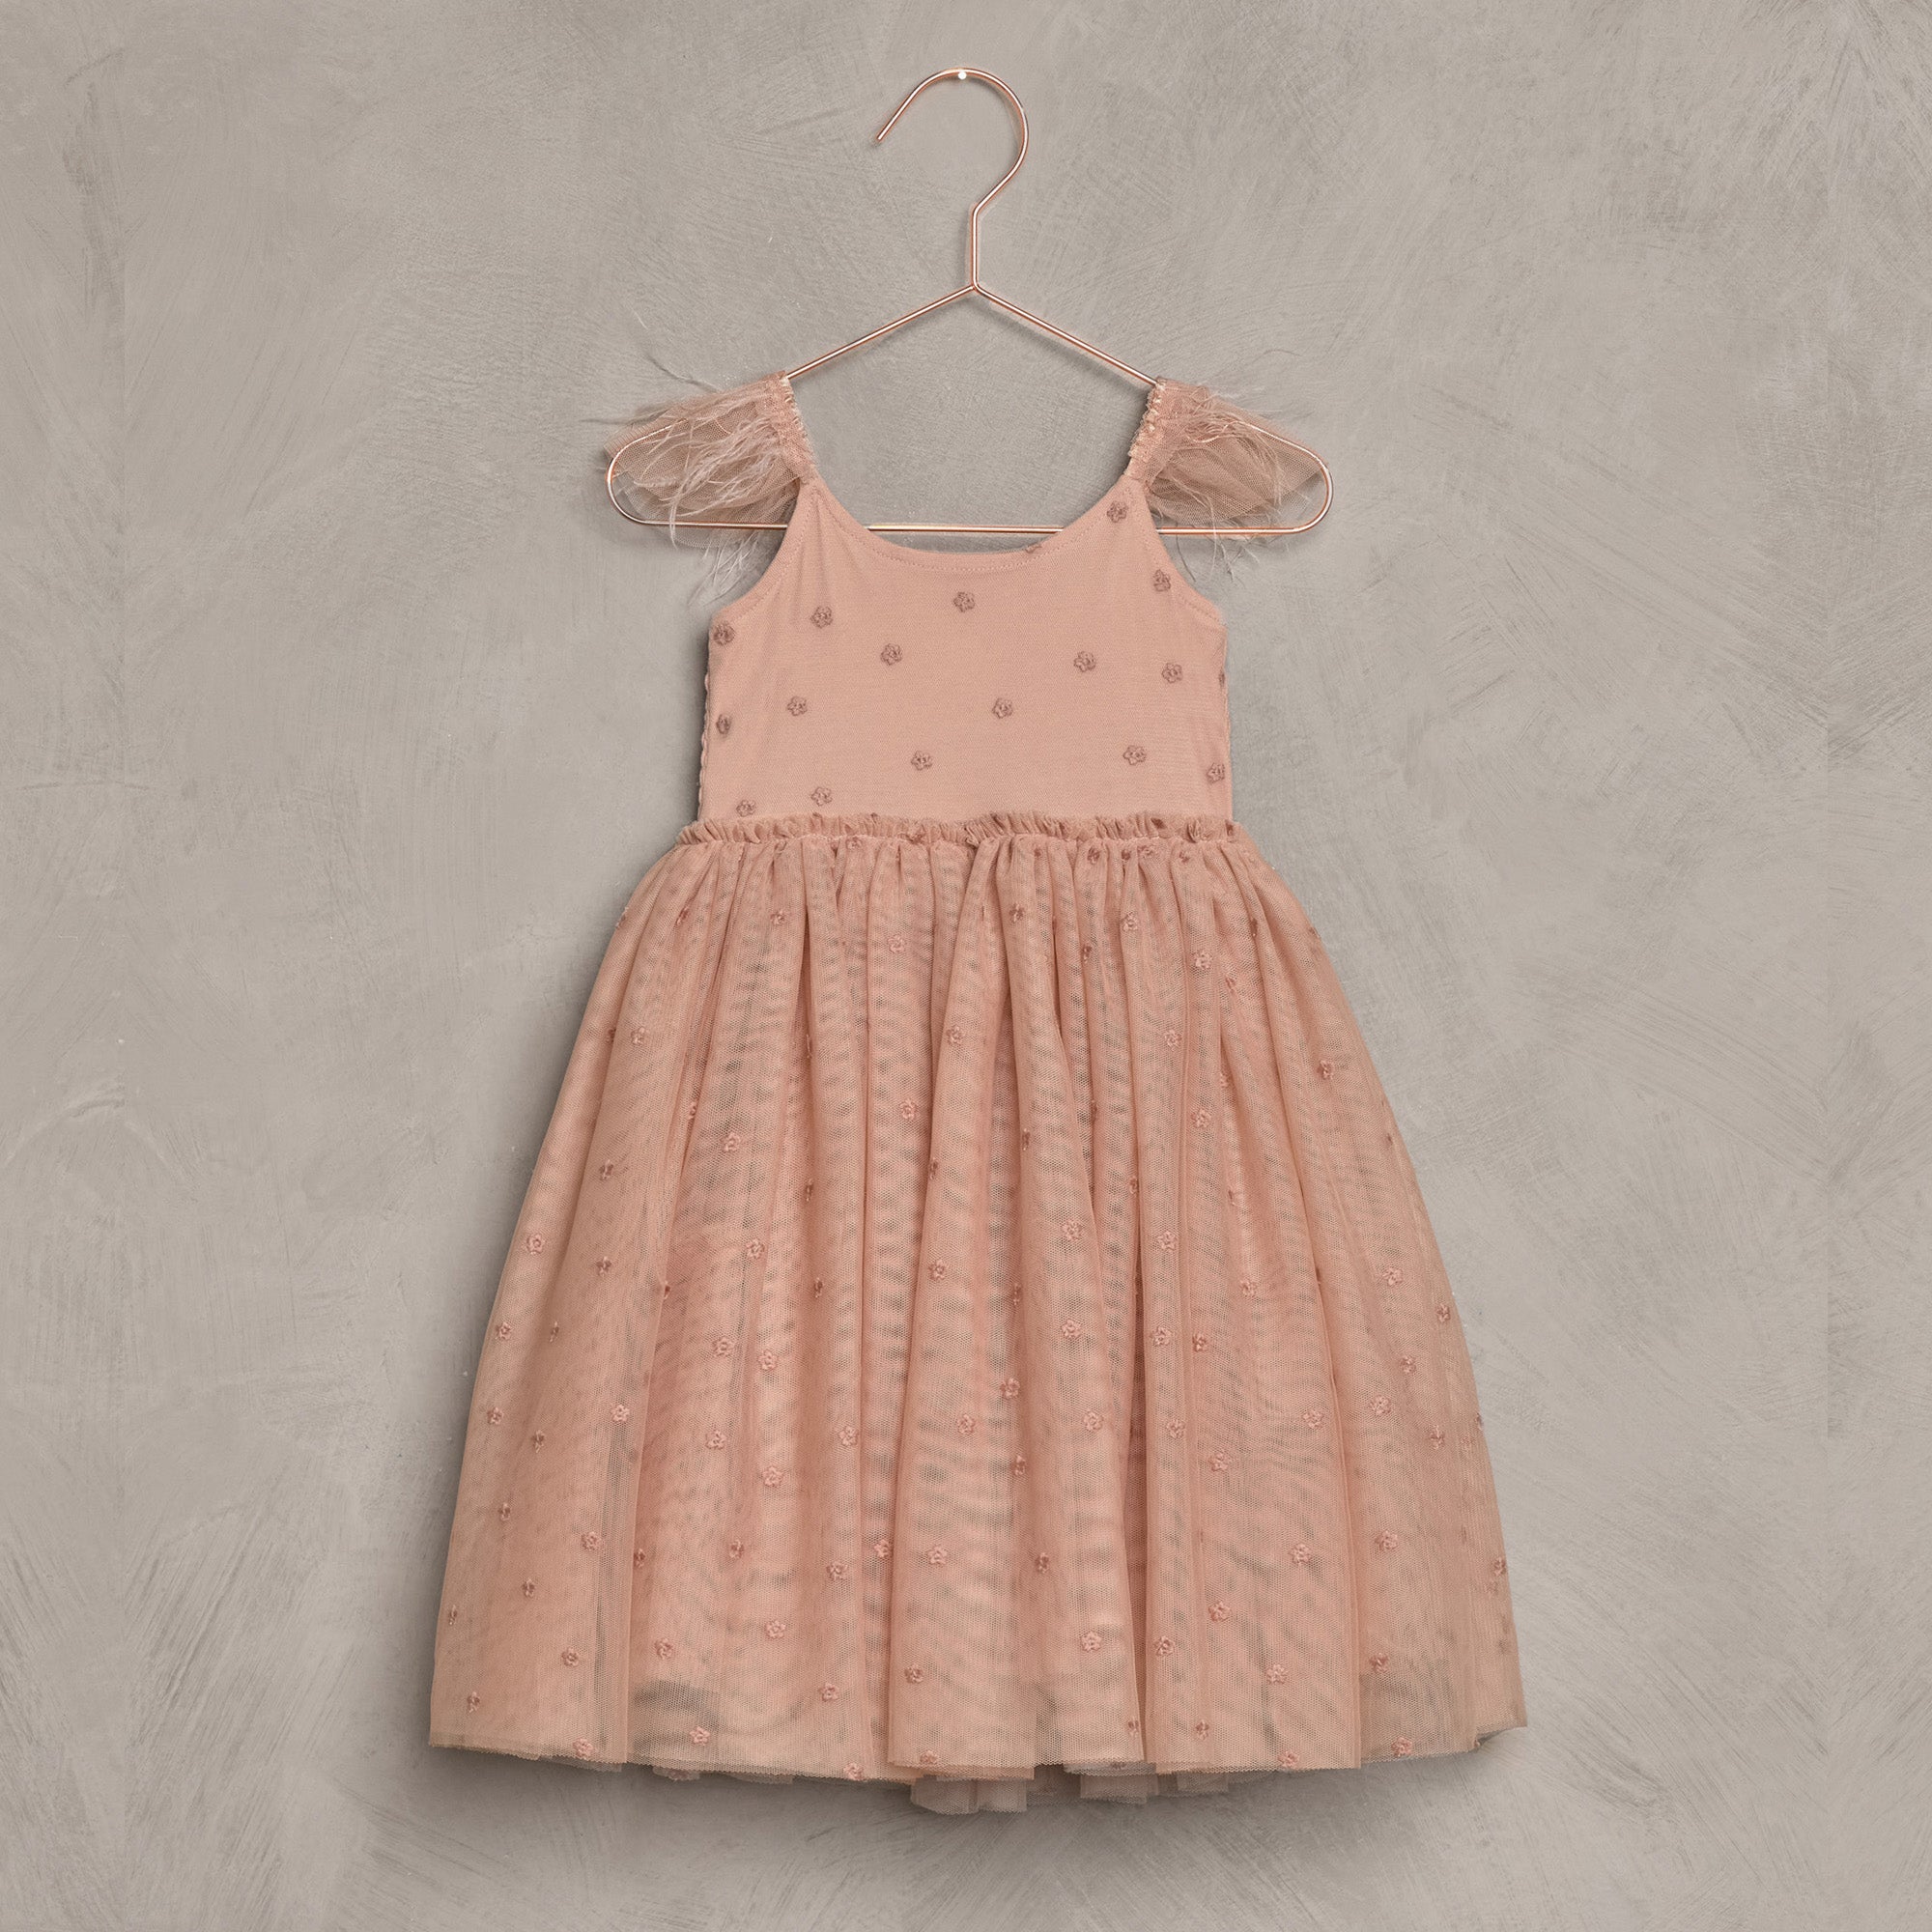 Noralee_Noralee Poppy Dress Dusty Rose_Dresses